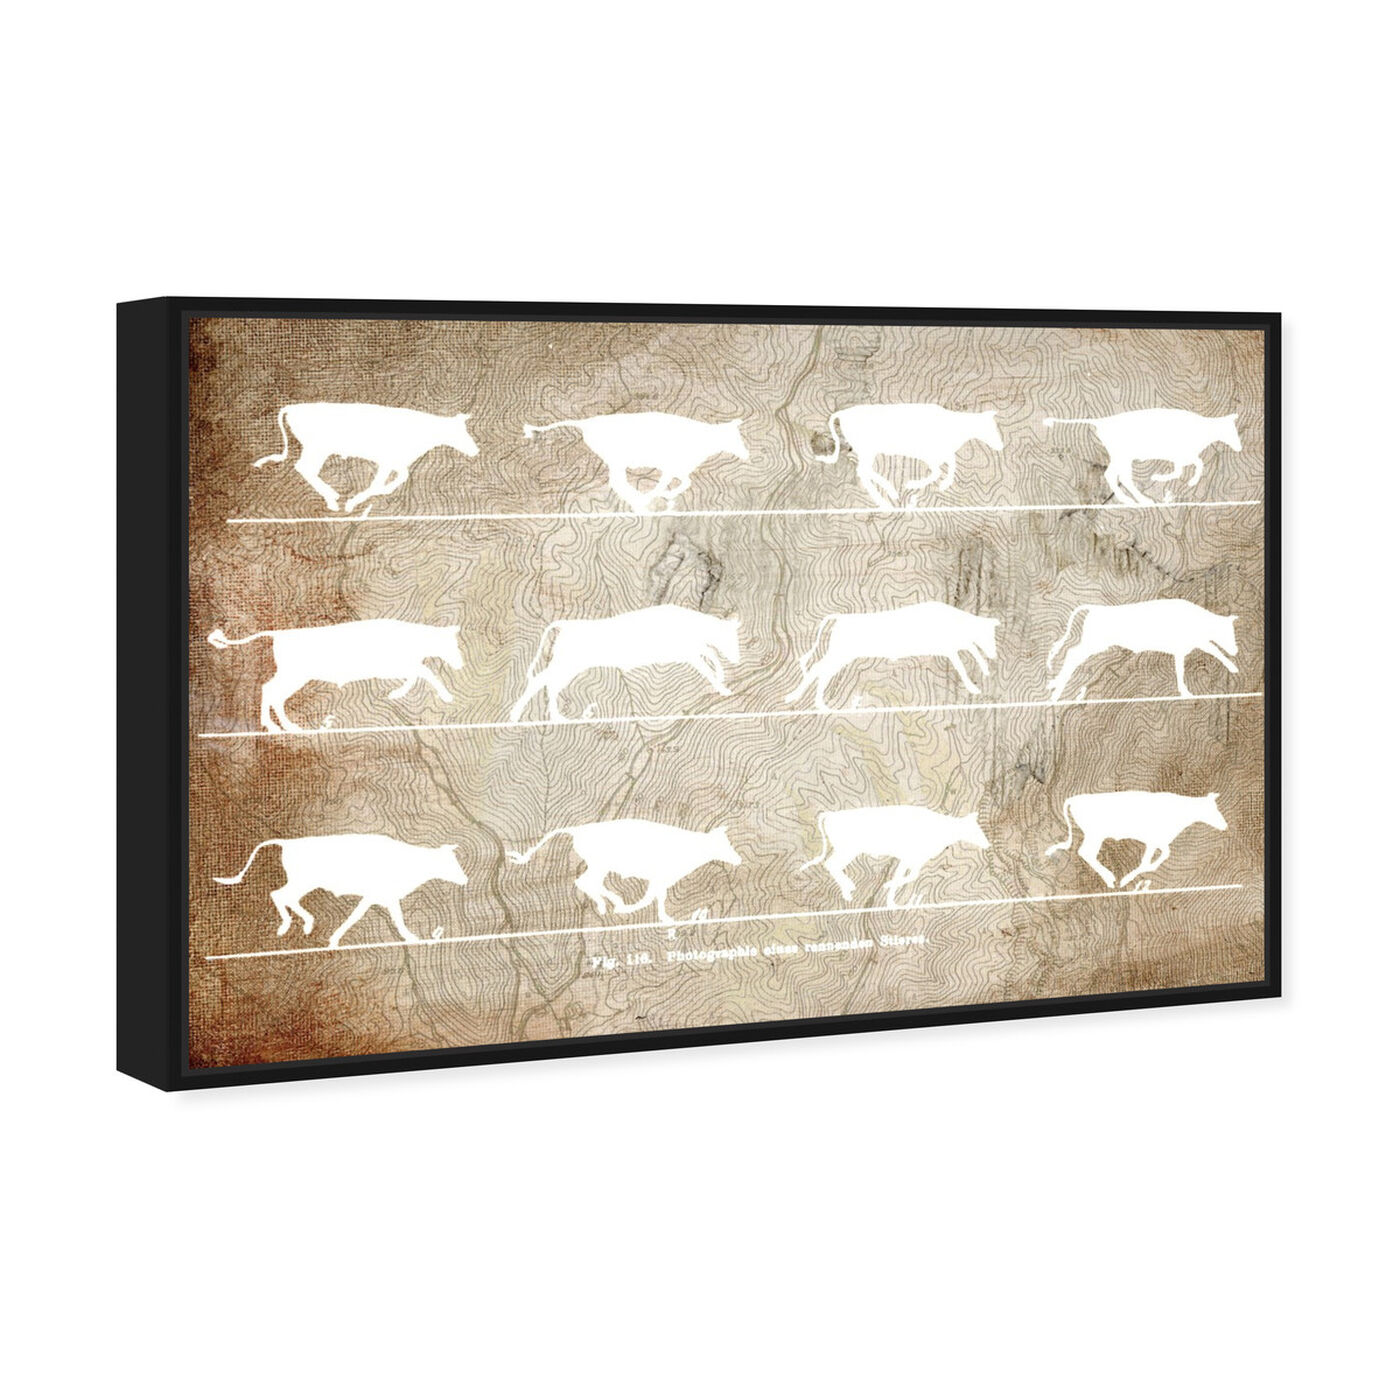 Angled view of Cows in Motion featuring animals and farm animals art.